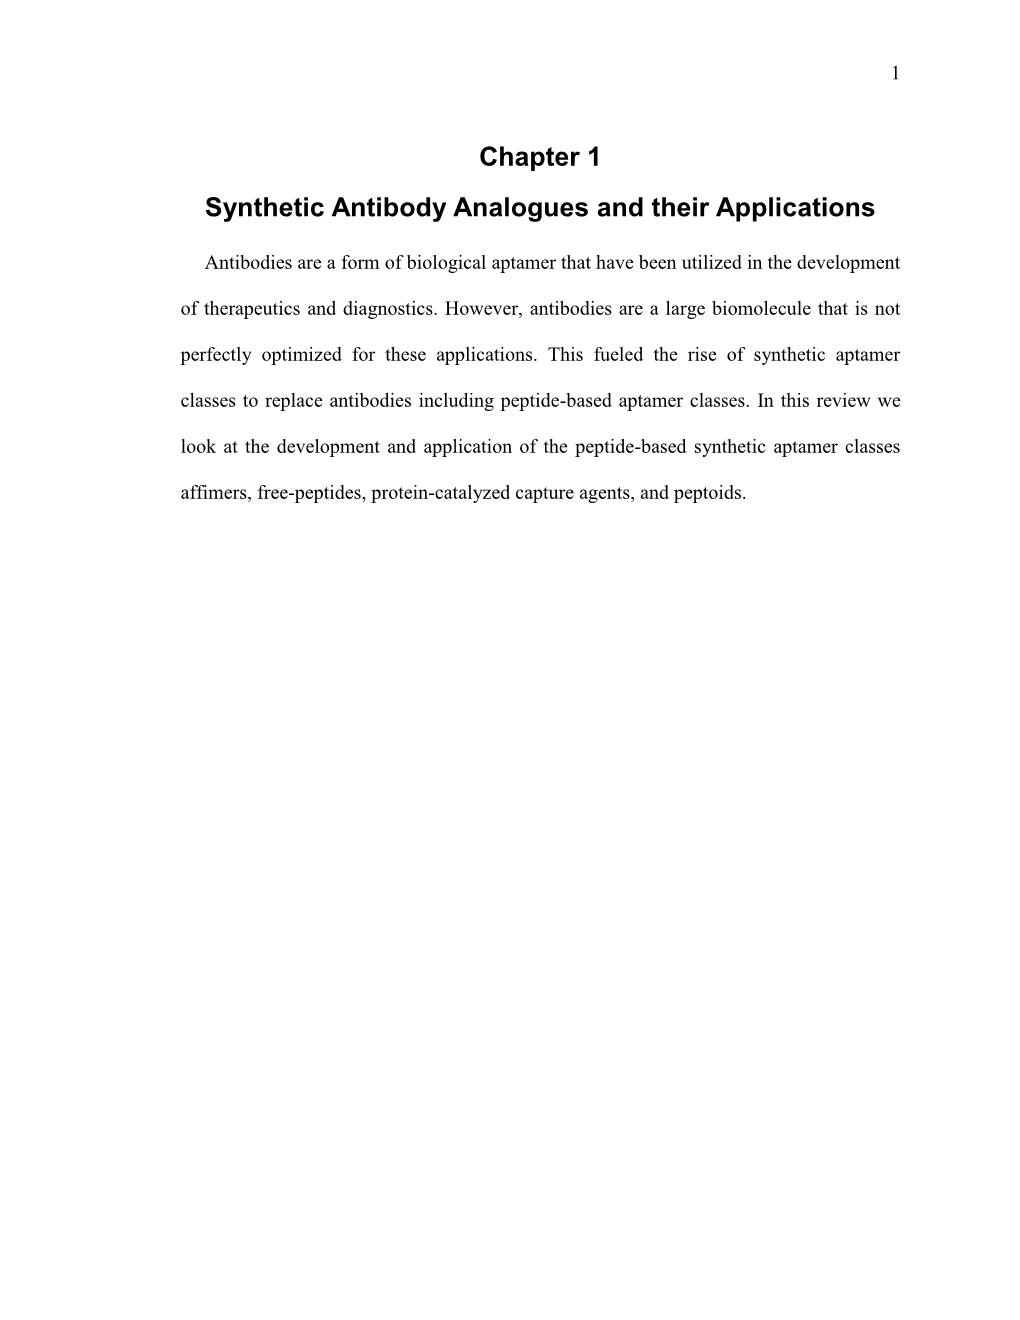 Chapter 1 Synthetic Antibody Analogues and Their Applications